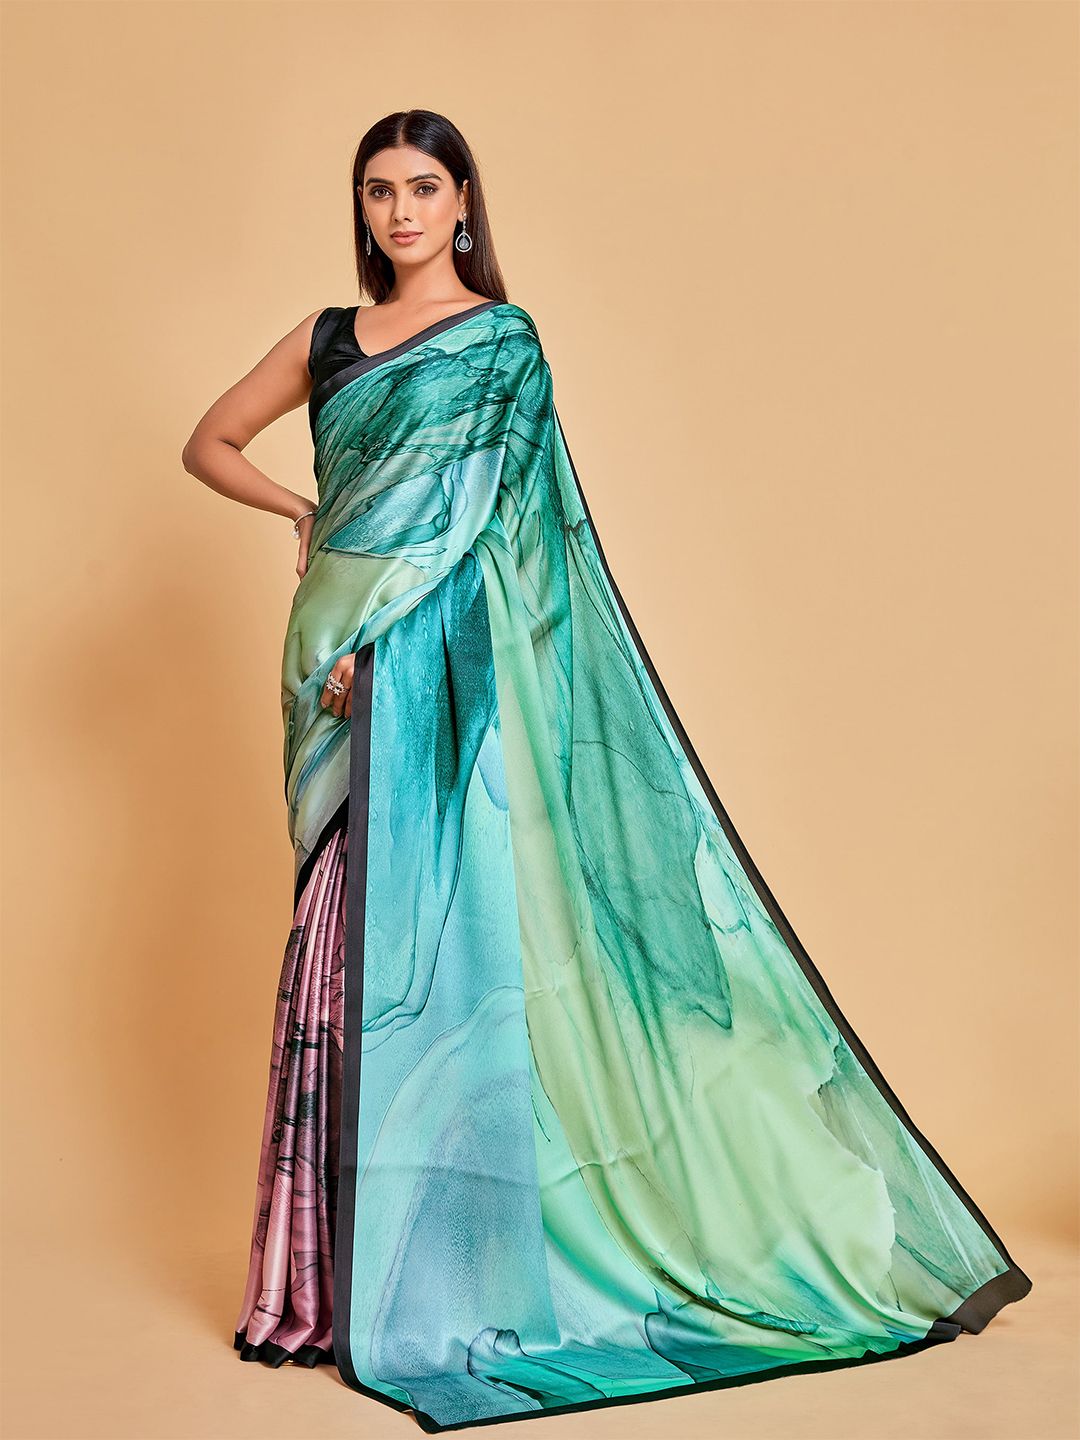 all about you Teal & Pink Satin Saree Price in India